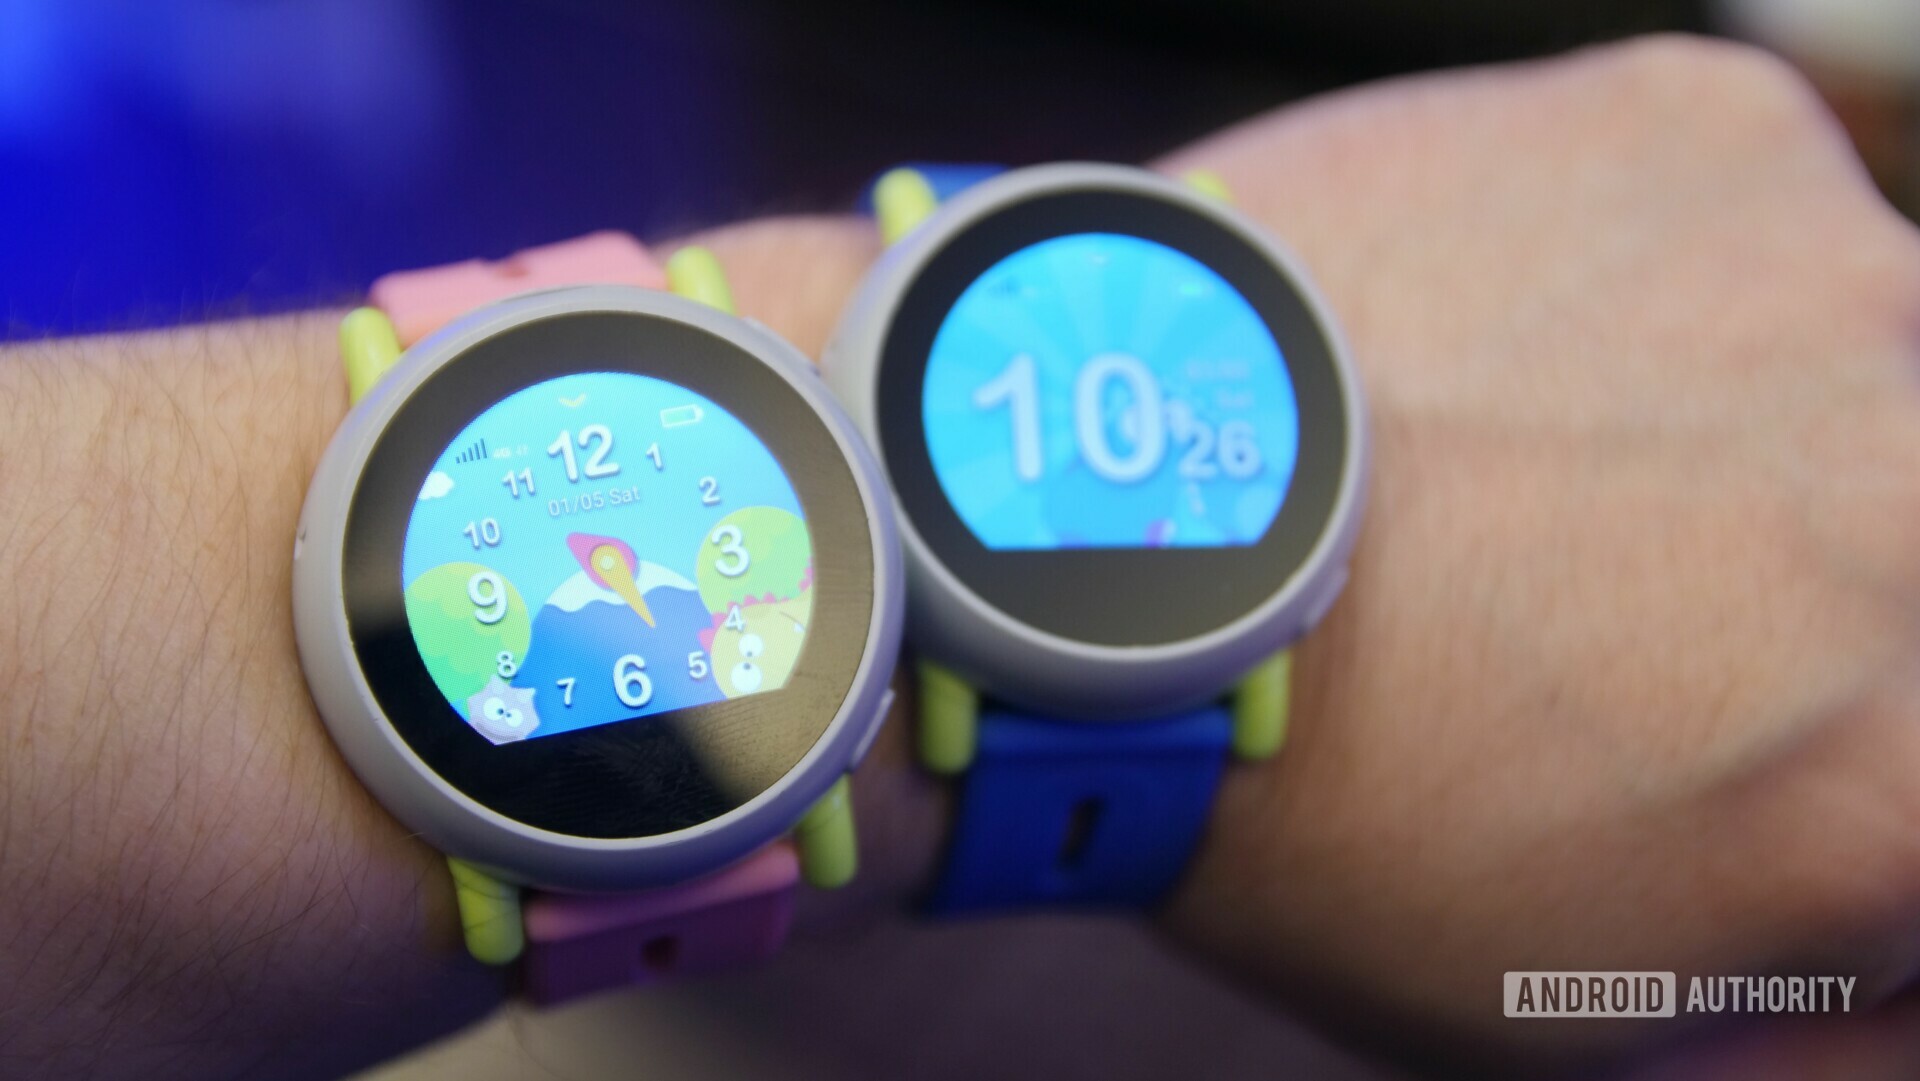 Coolpad Dyno smartwatch on a wrist at CES 2019